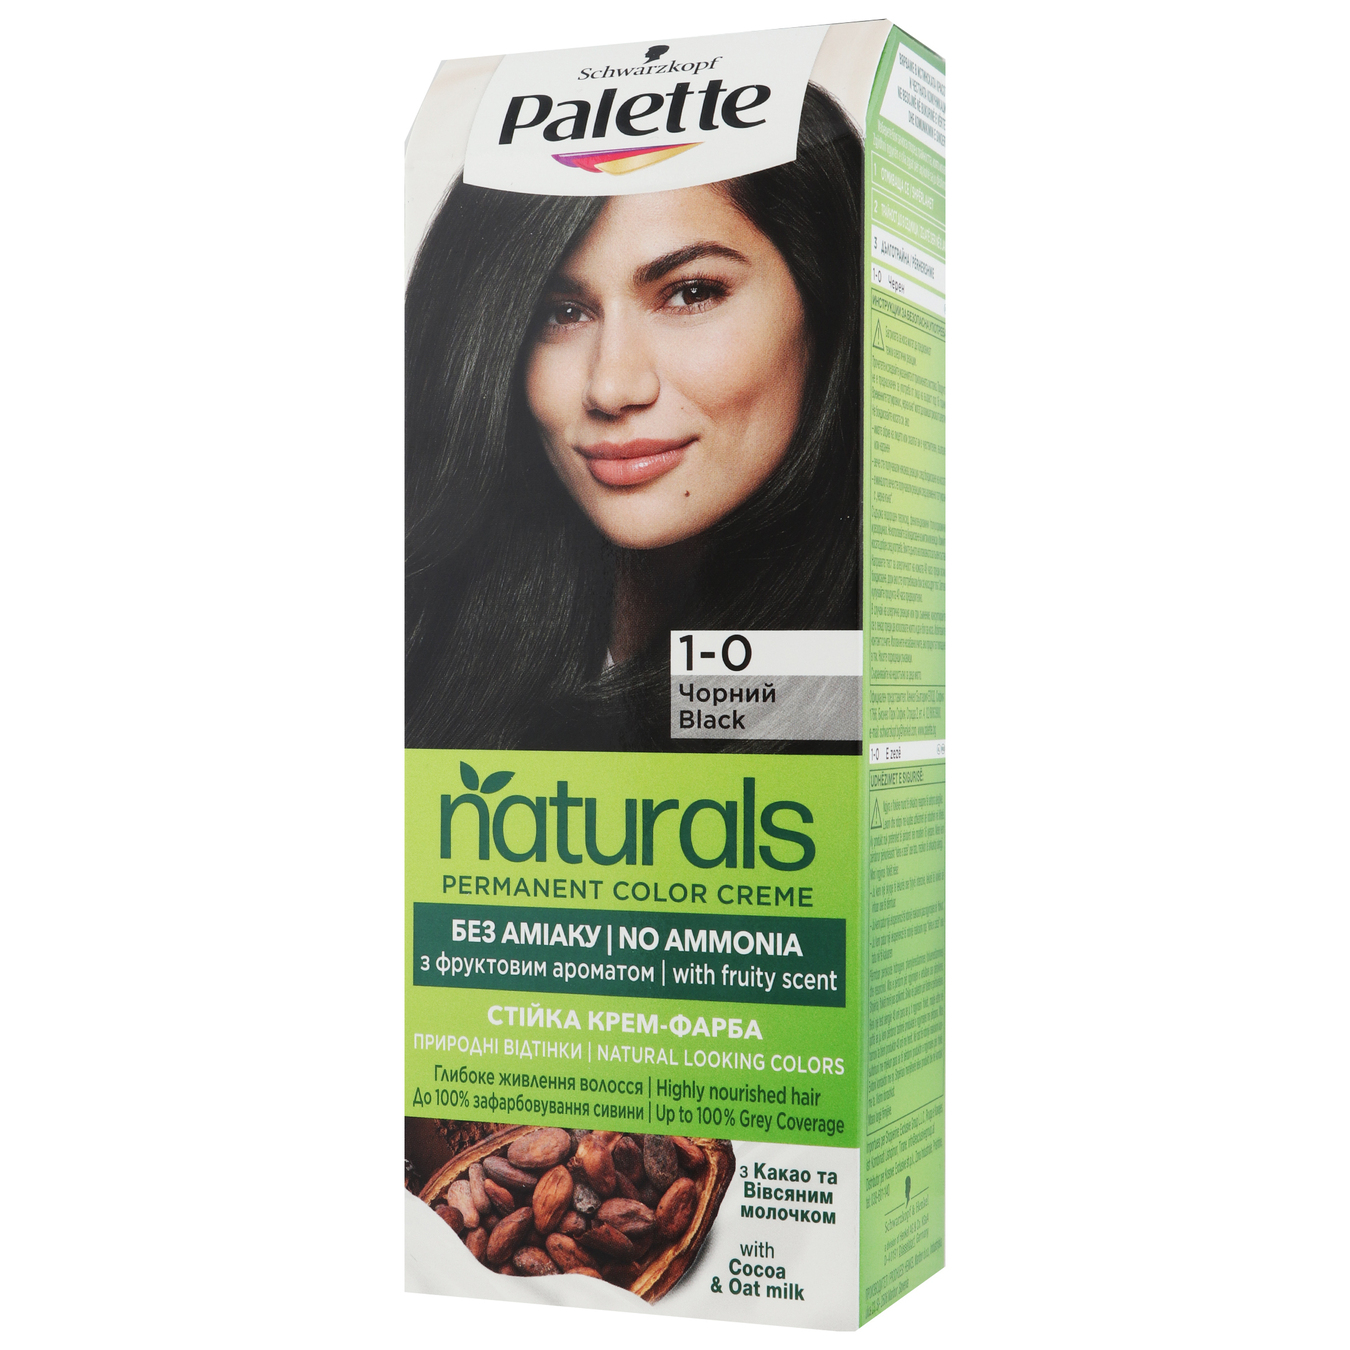 Cream paint Palette Naturals 1-0 Black for hair without ammonia permanent 110ml 3